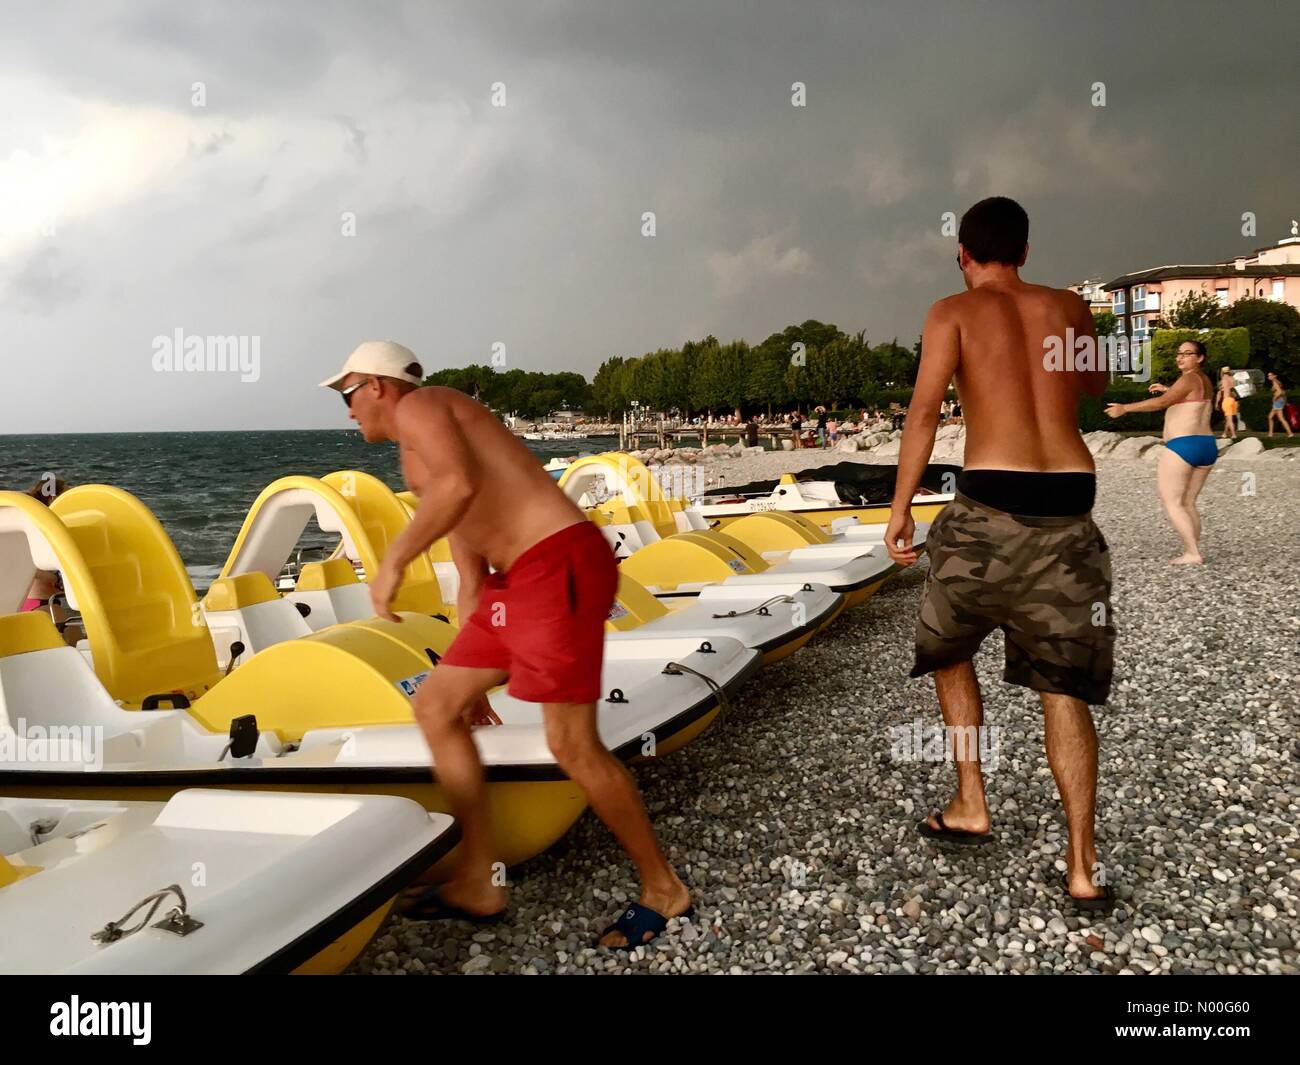 Italy thunderstorms- Bardolino, Lake Garda, Italy. Sunday 6th August - After a week of extreme hot weather thunderstorms arrive over Lake Garda at midday. Stock Photo